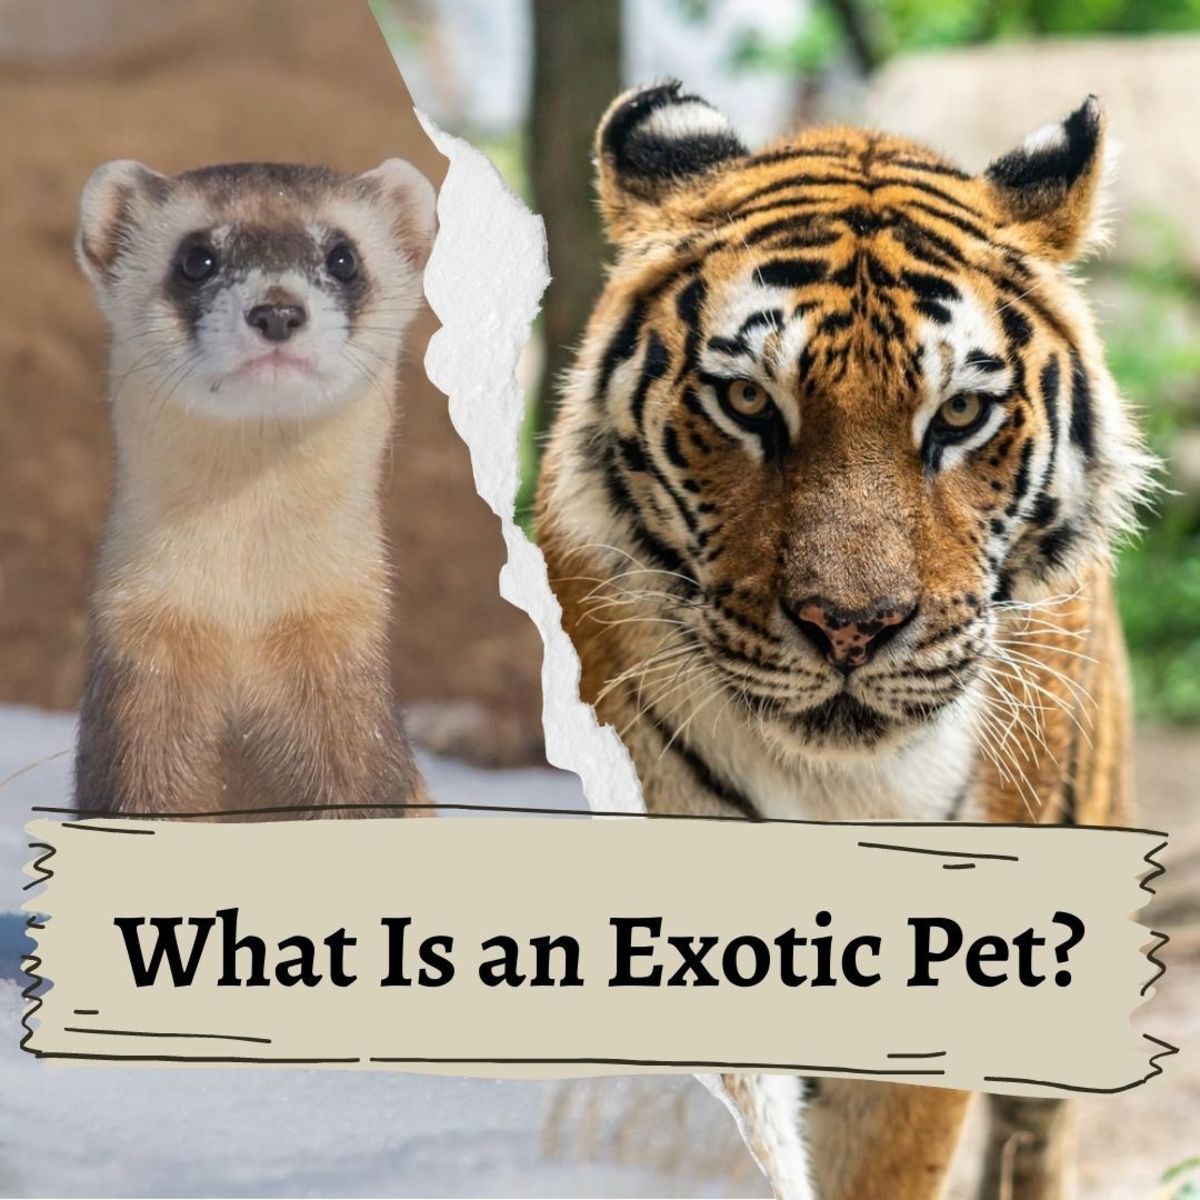 What Is an Exotic Pet? - PetHelpful